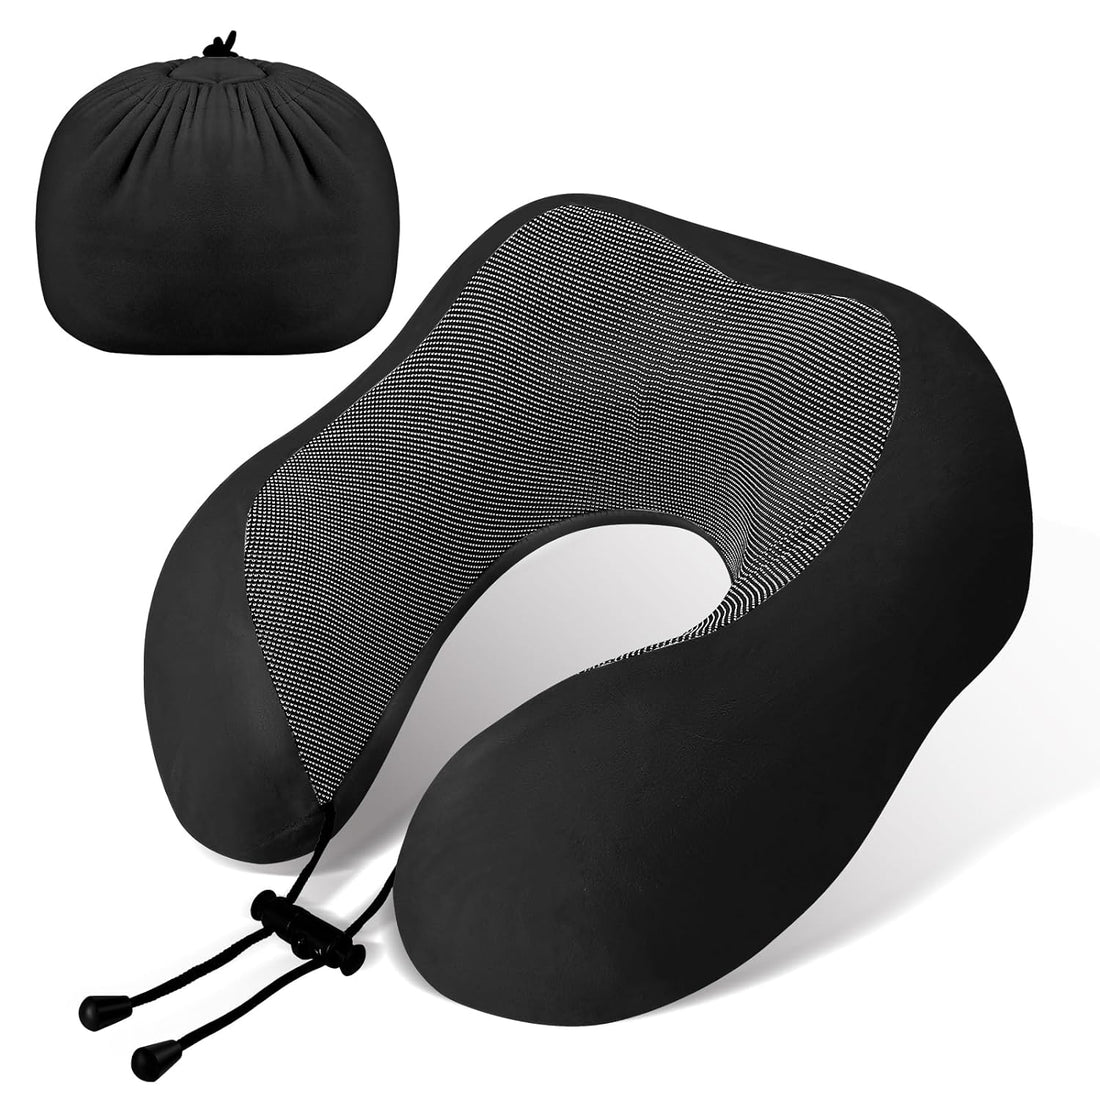 wowpower Airplane Travel Neck Pillow, 100% Pure Memory Foam (4 Seconds Rebound) on Head Support,Upgrade Portable Neck Pillow for Plane and Car Traveling Sleep 1 Pack(Black)